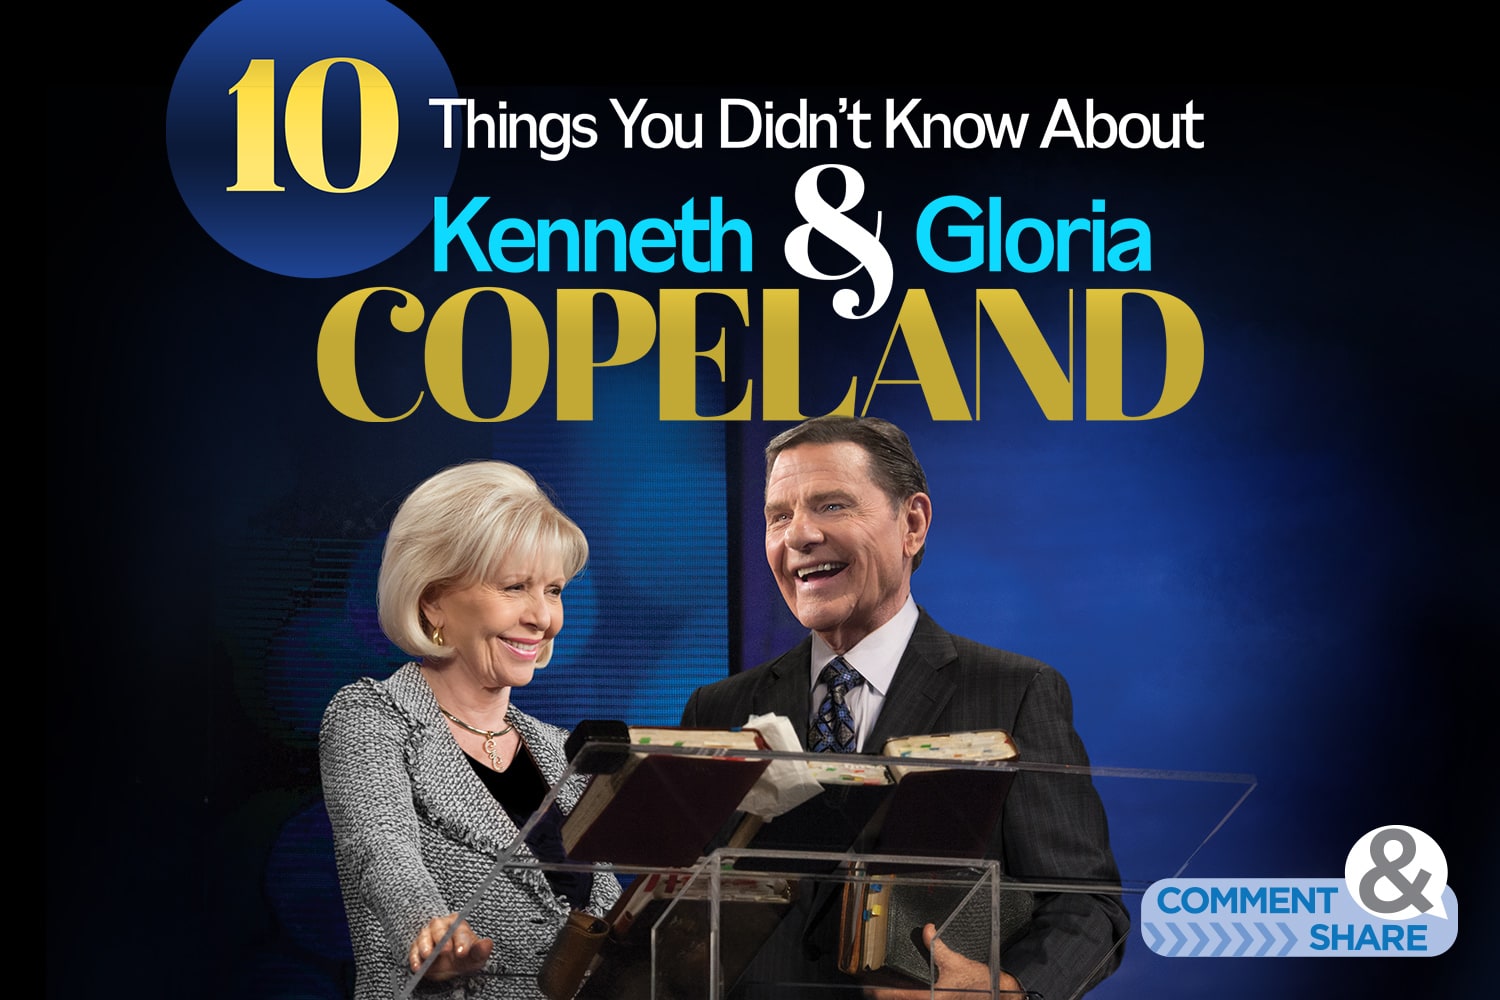 10 Things You Didn't Know About Kenneth and Gloria Copeland